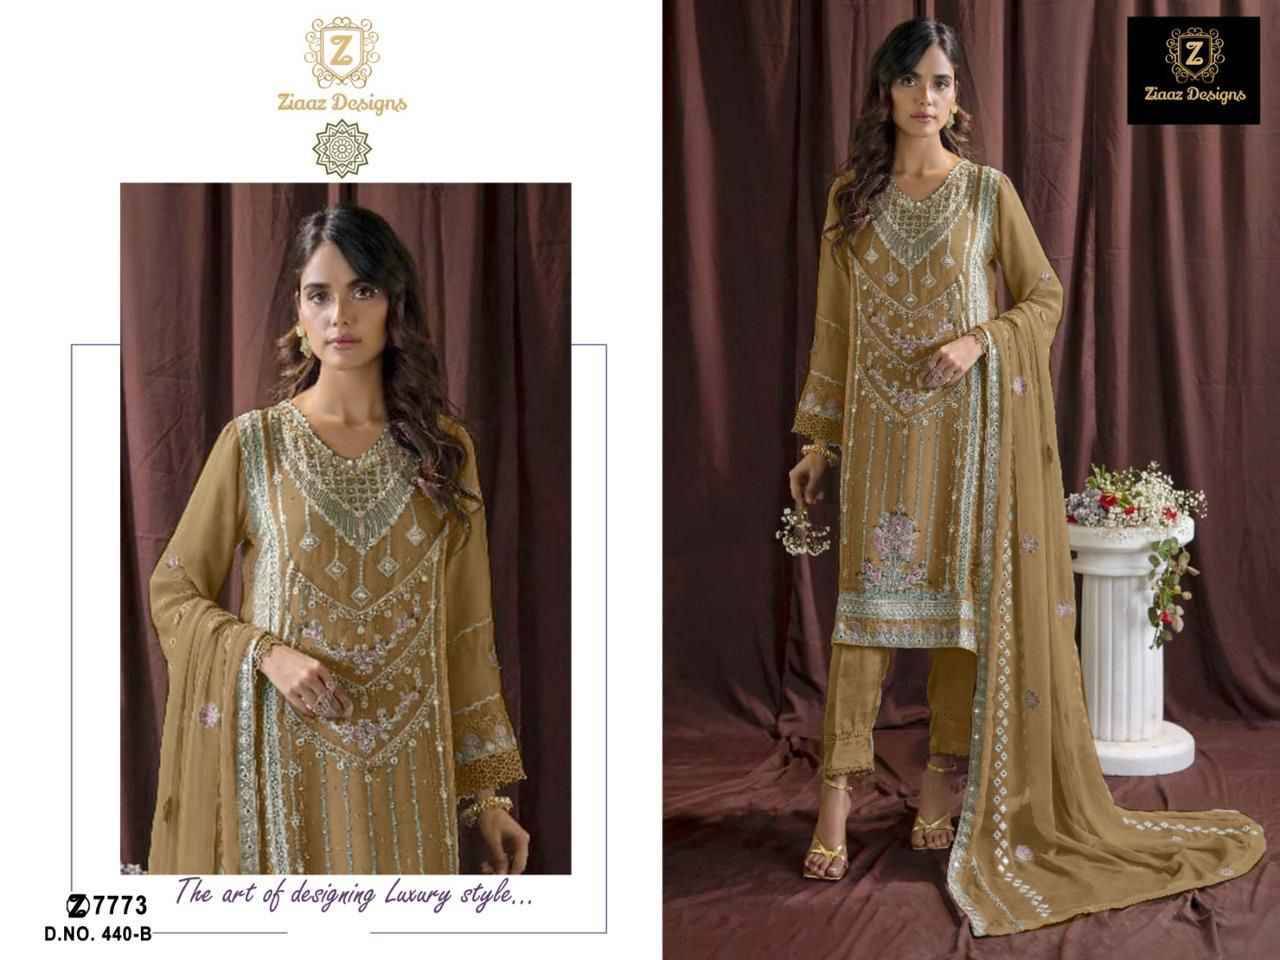 Ziaaz Designs Hit Design 440 Colours By Ziaaz Designs 440 To 440-B Series Designer Pakistani Suits Collection Beautiful Stylish Fancy Colorful Party Wear & Occasional Wear Chinnon Embroidered Dresses At Wholesale Price